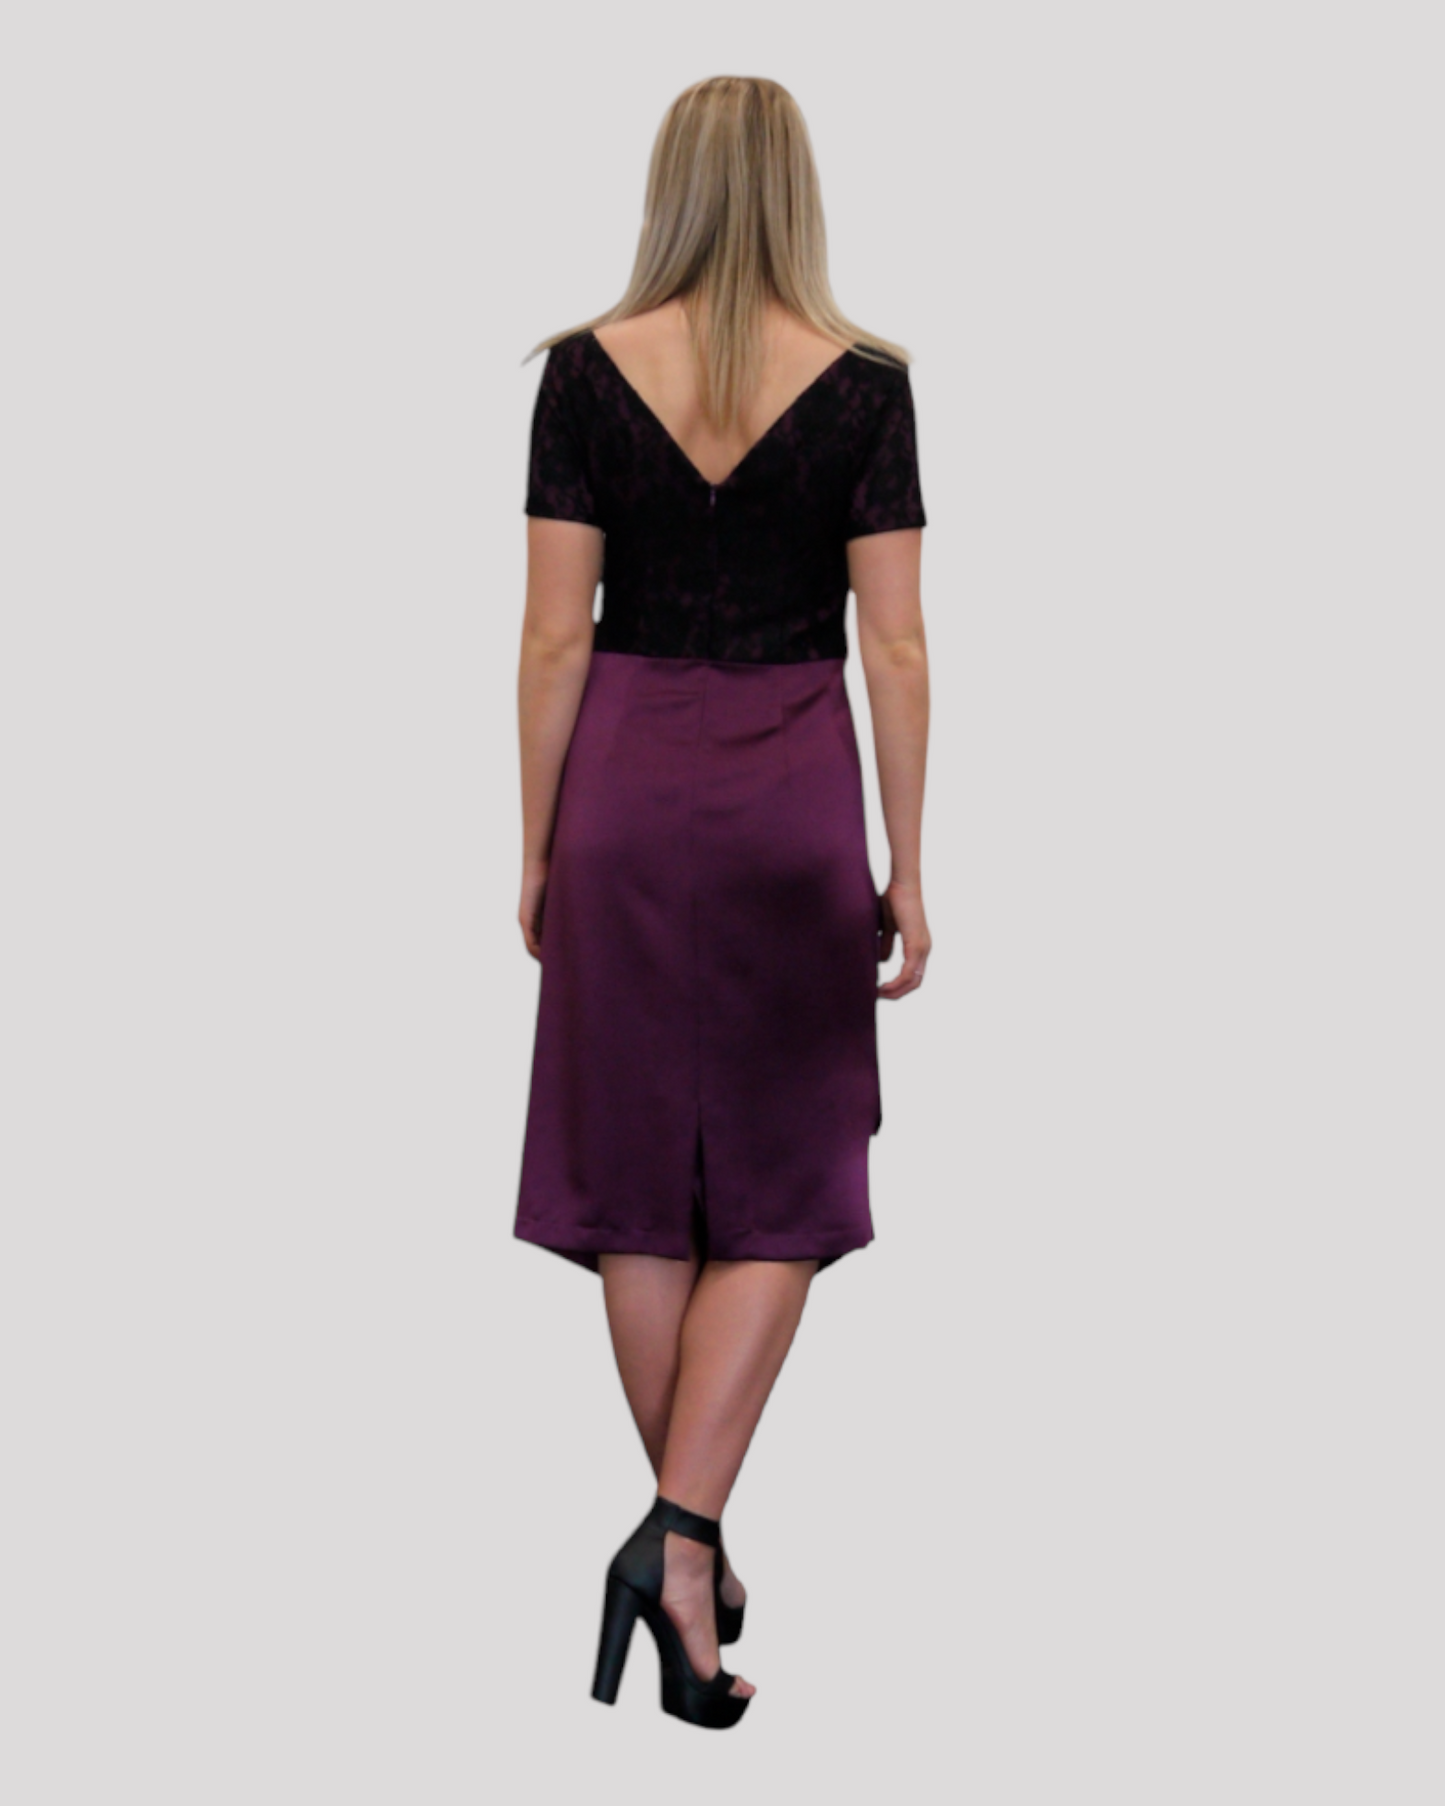 Cathy Purple and Lace Cocktail Dress